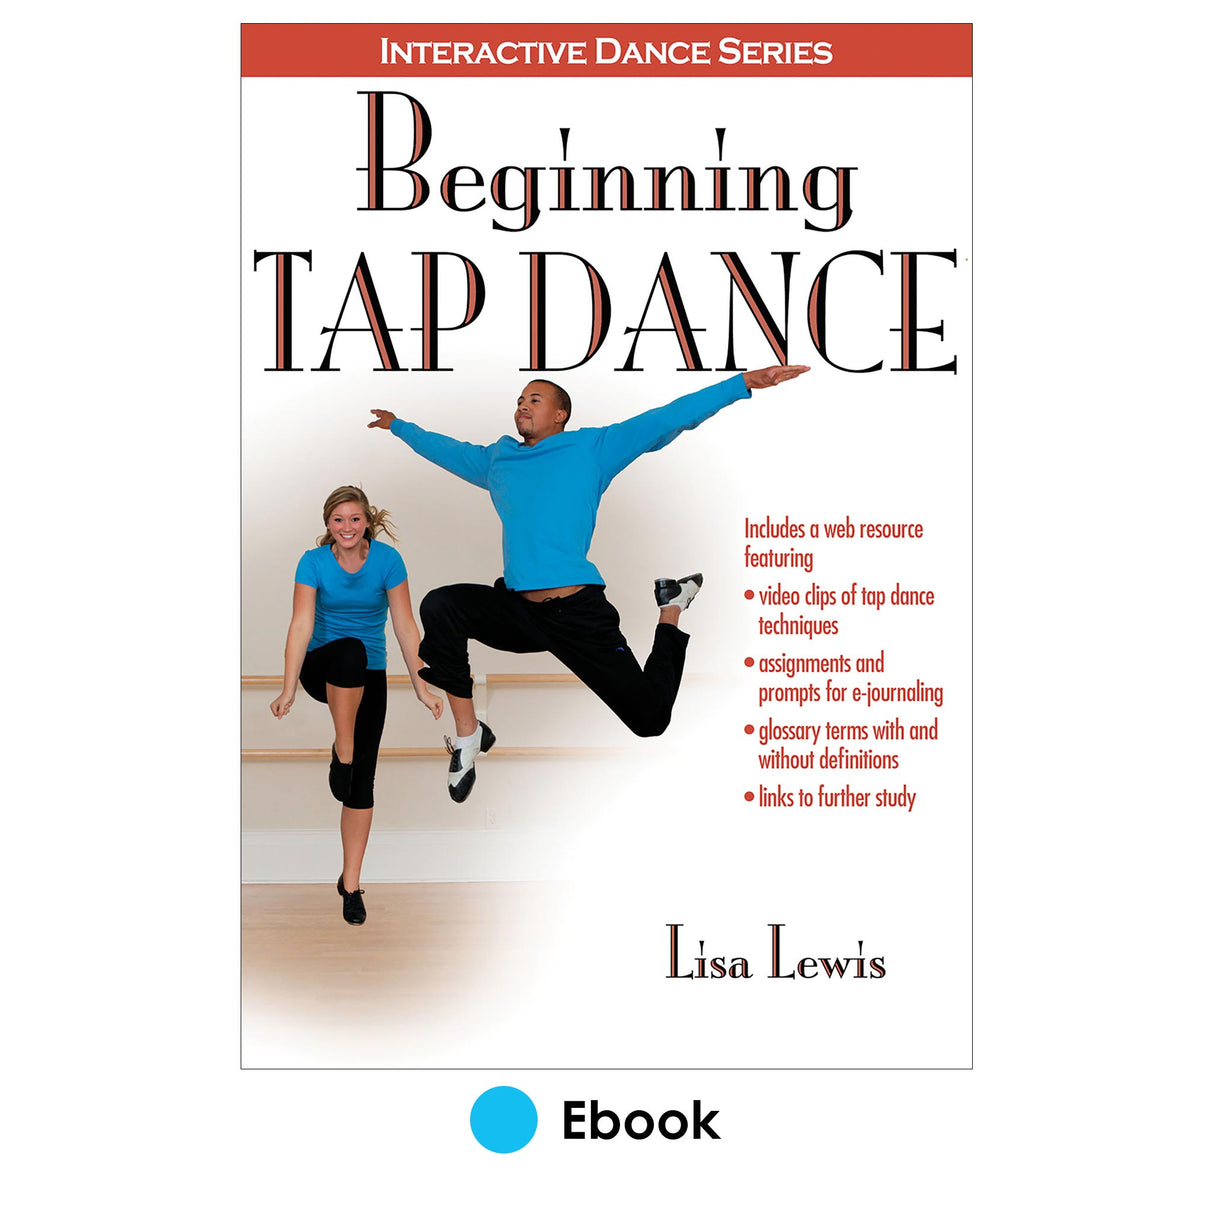 Beginning Tap Dance Ebook With HKPropel Access